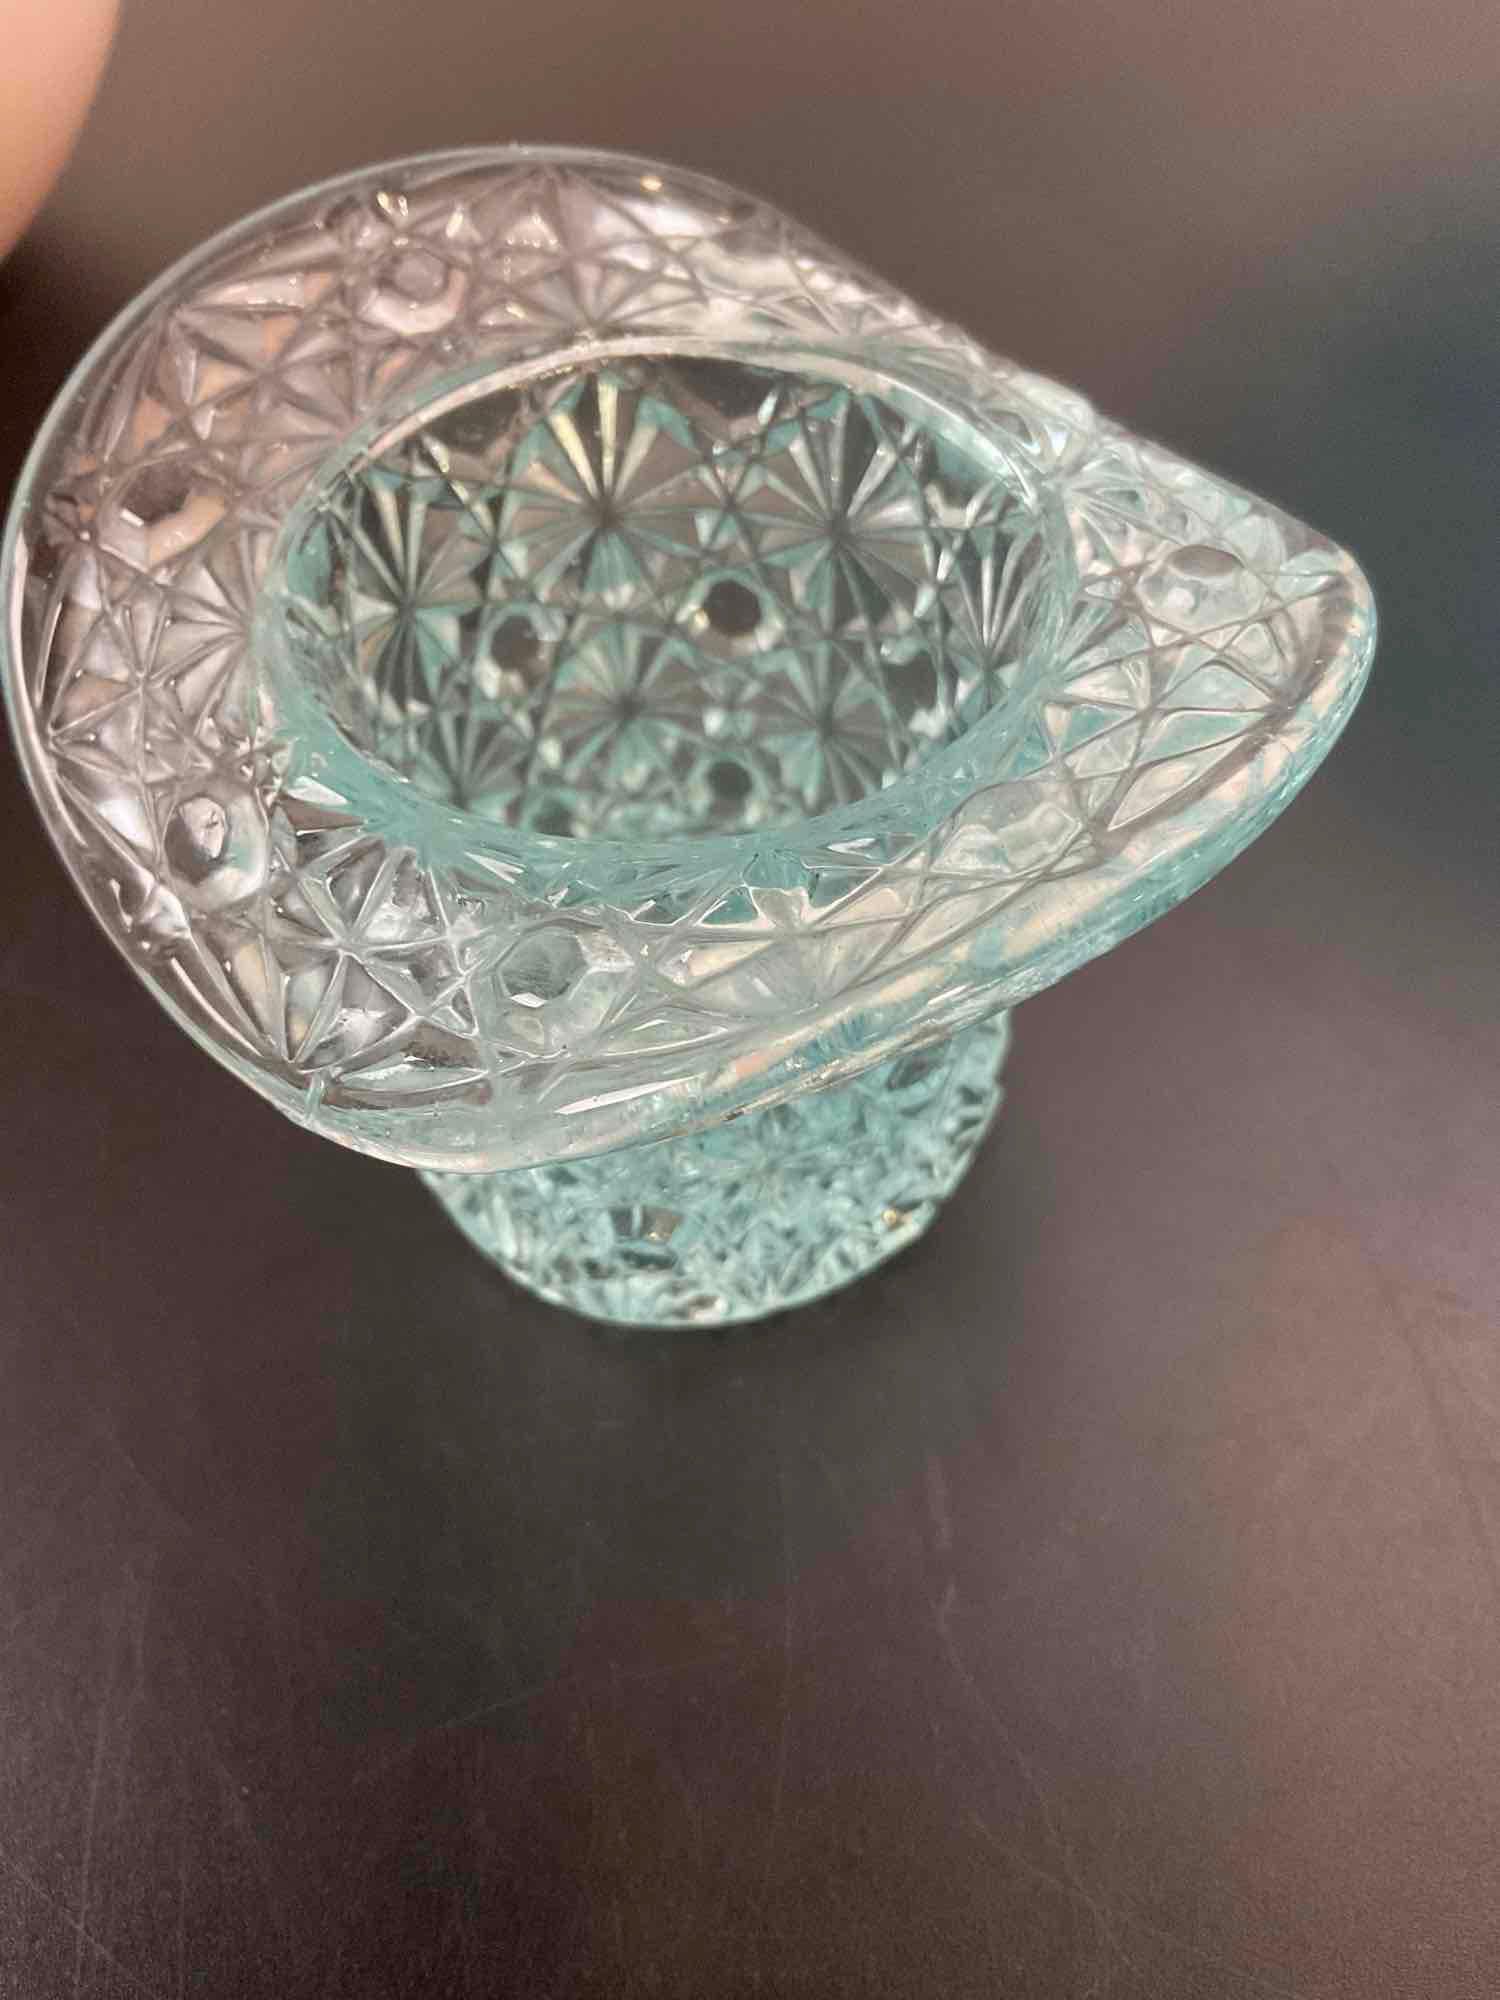 3 Pieces of Glass Art Blue Dish, Light Blue Top Hat, and Orange Frilled Bowl